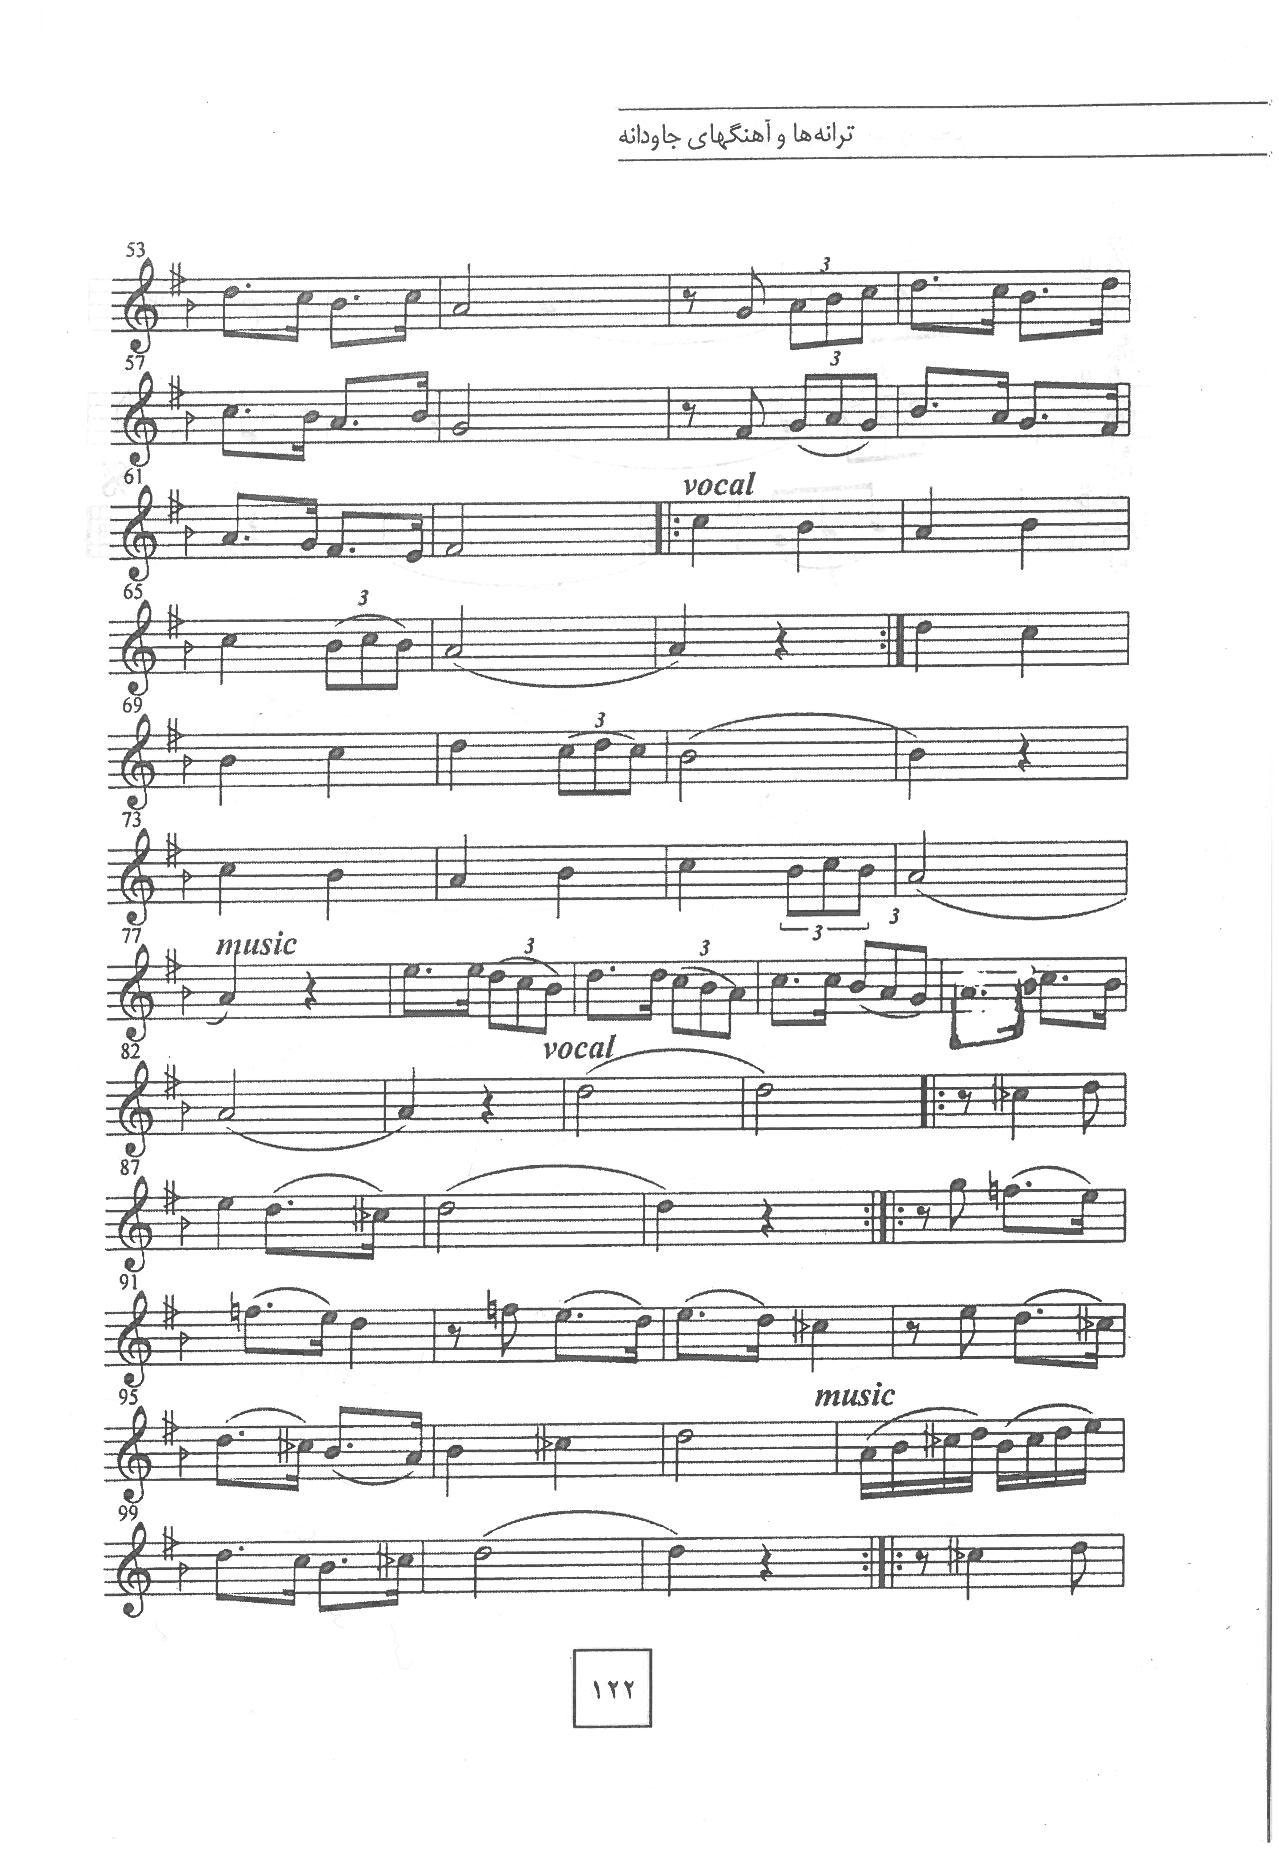 A sheet music page with many lines and notes.